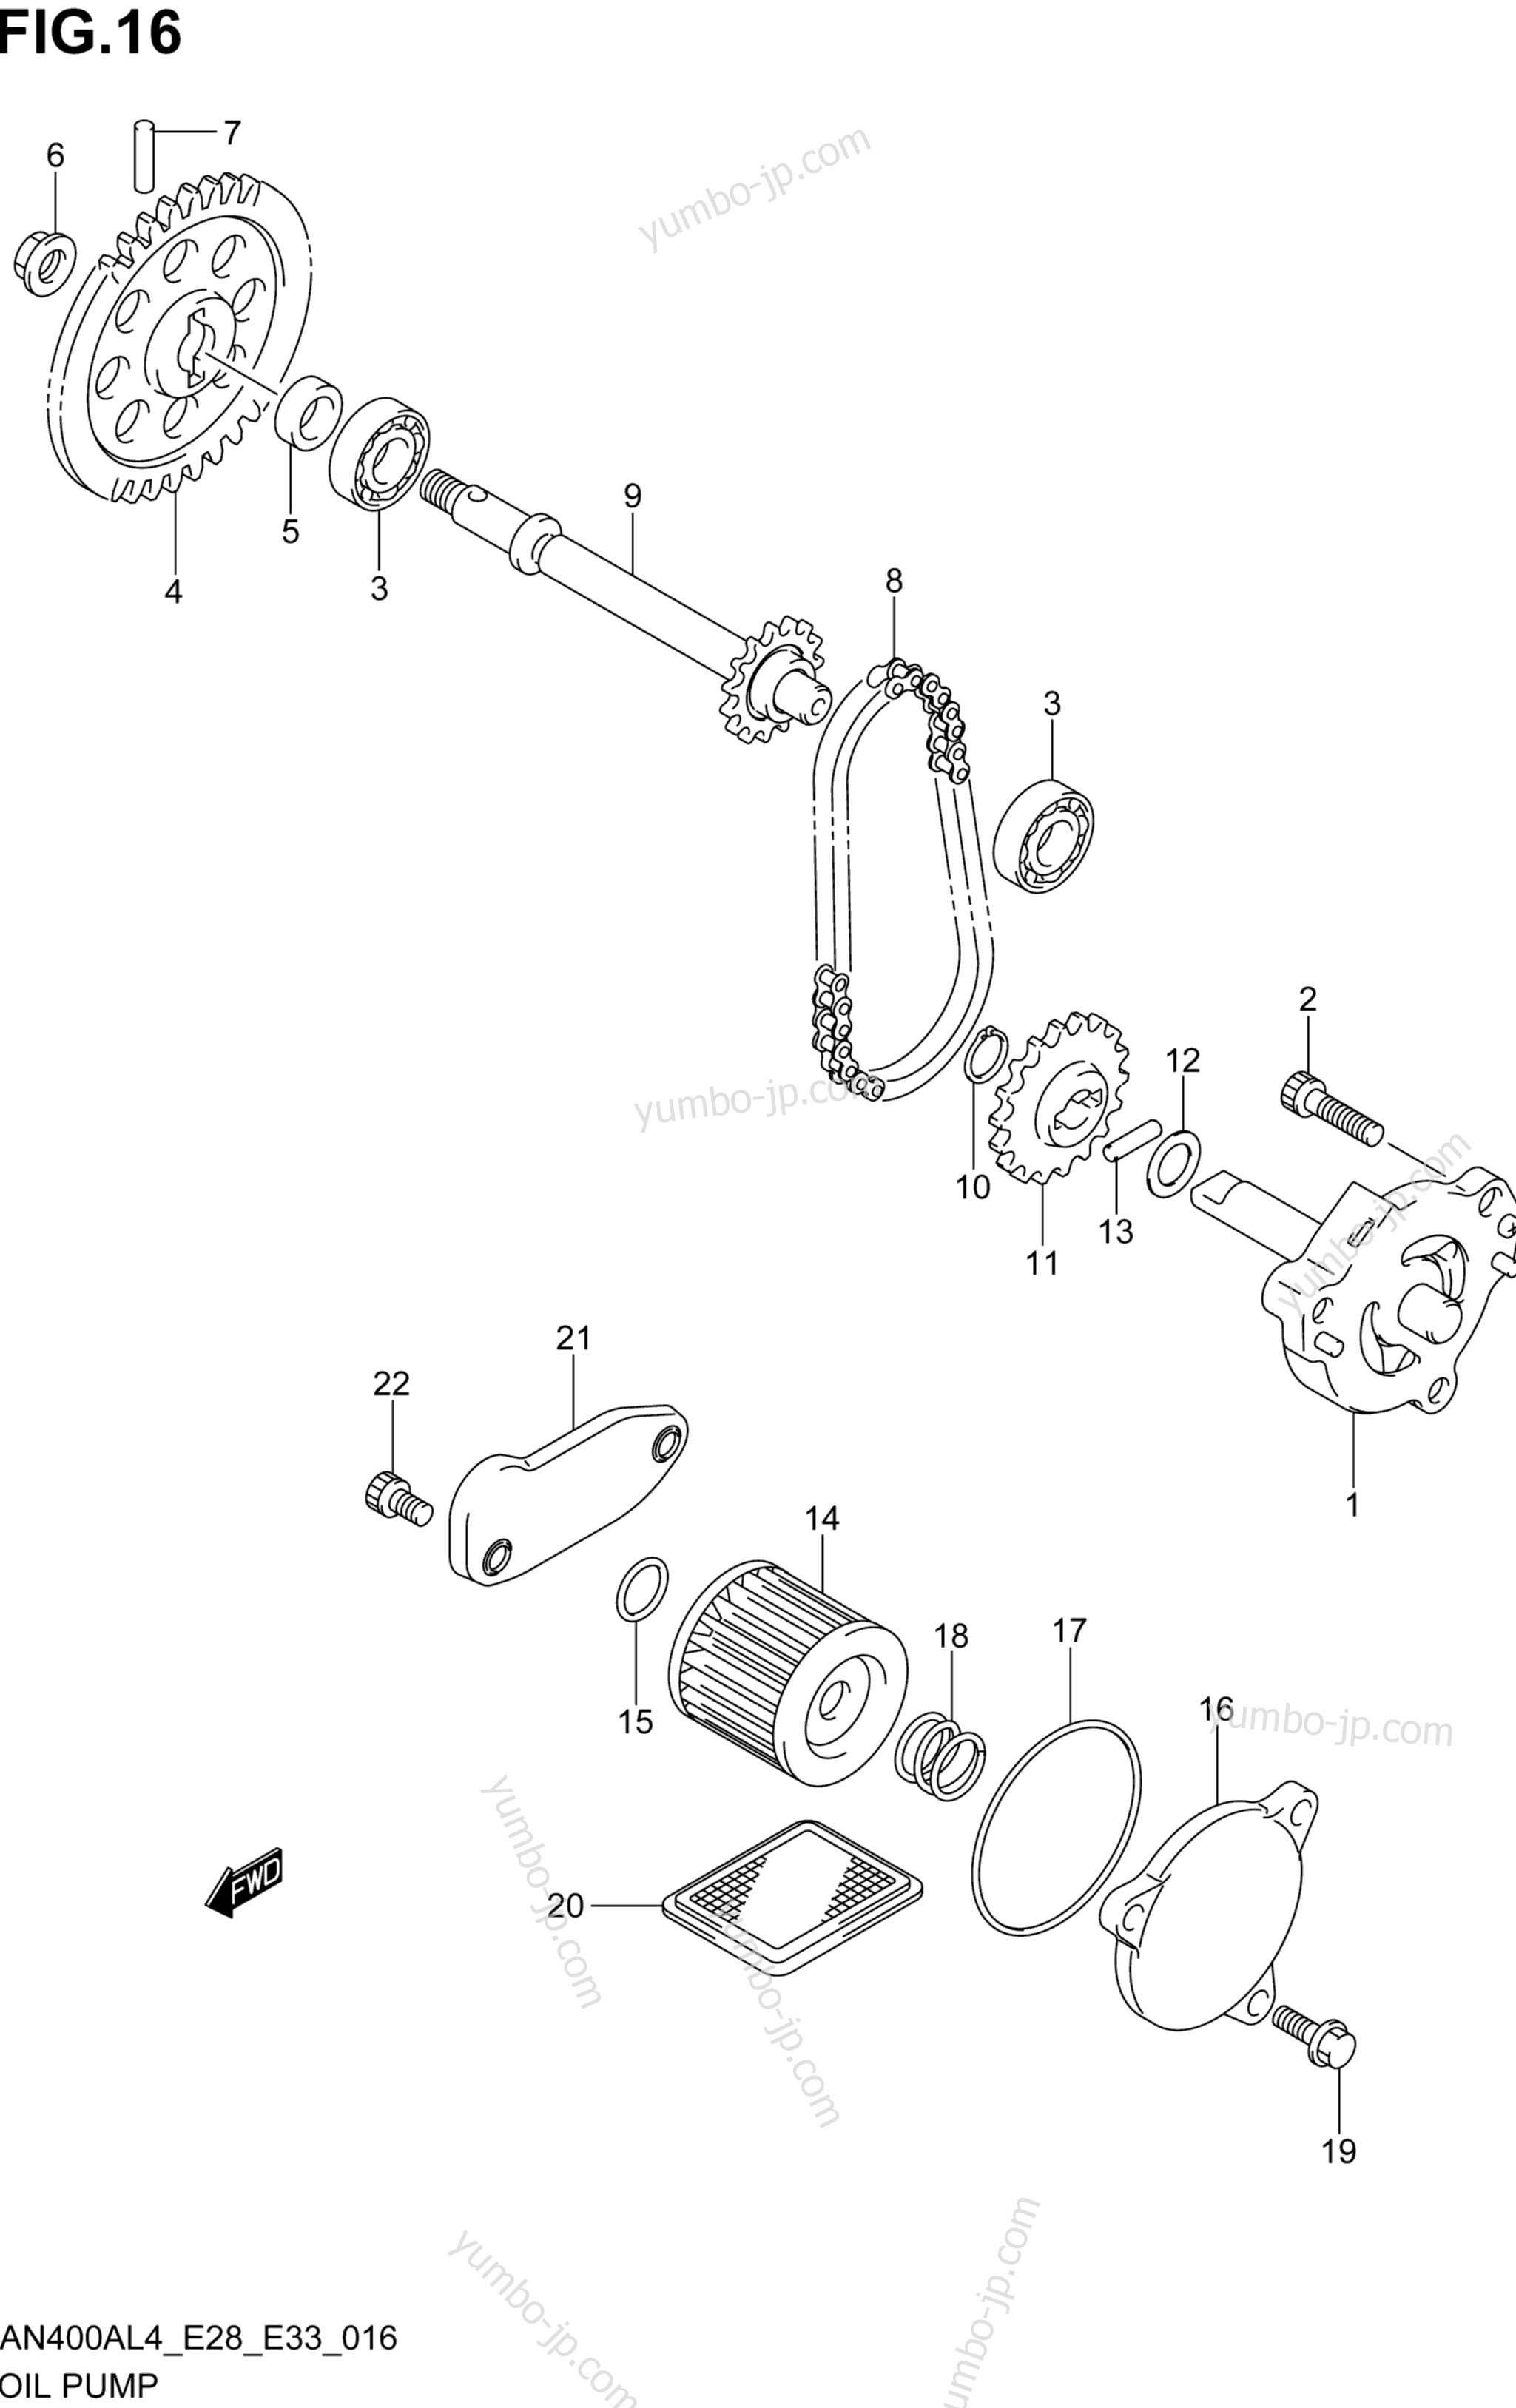 OIL PUMP for scooters SUZUKI AN400A 2014 year